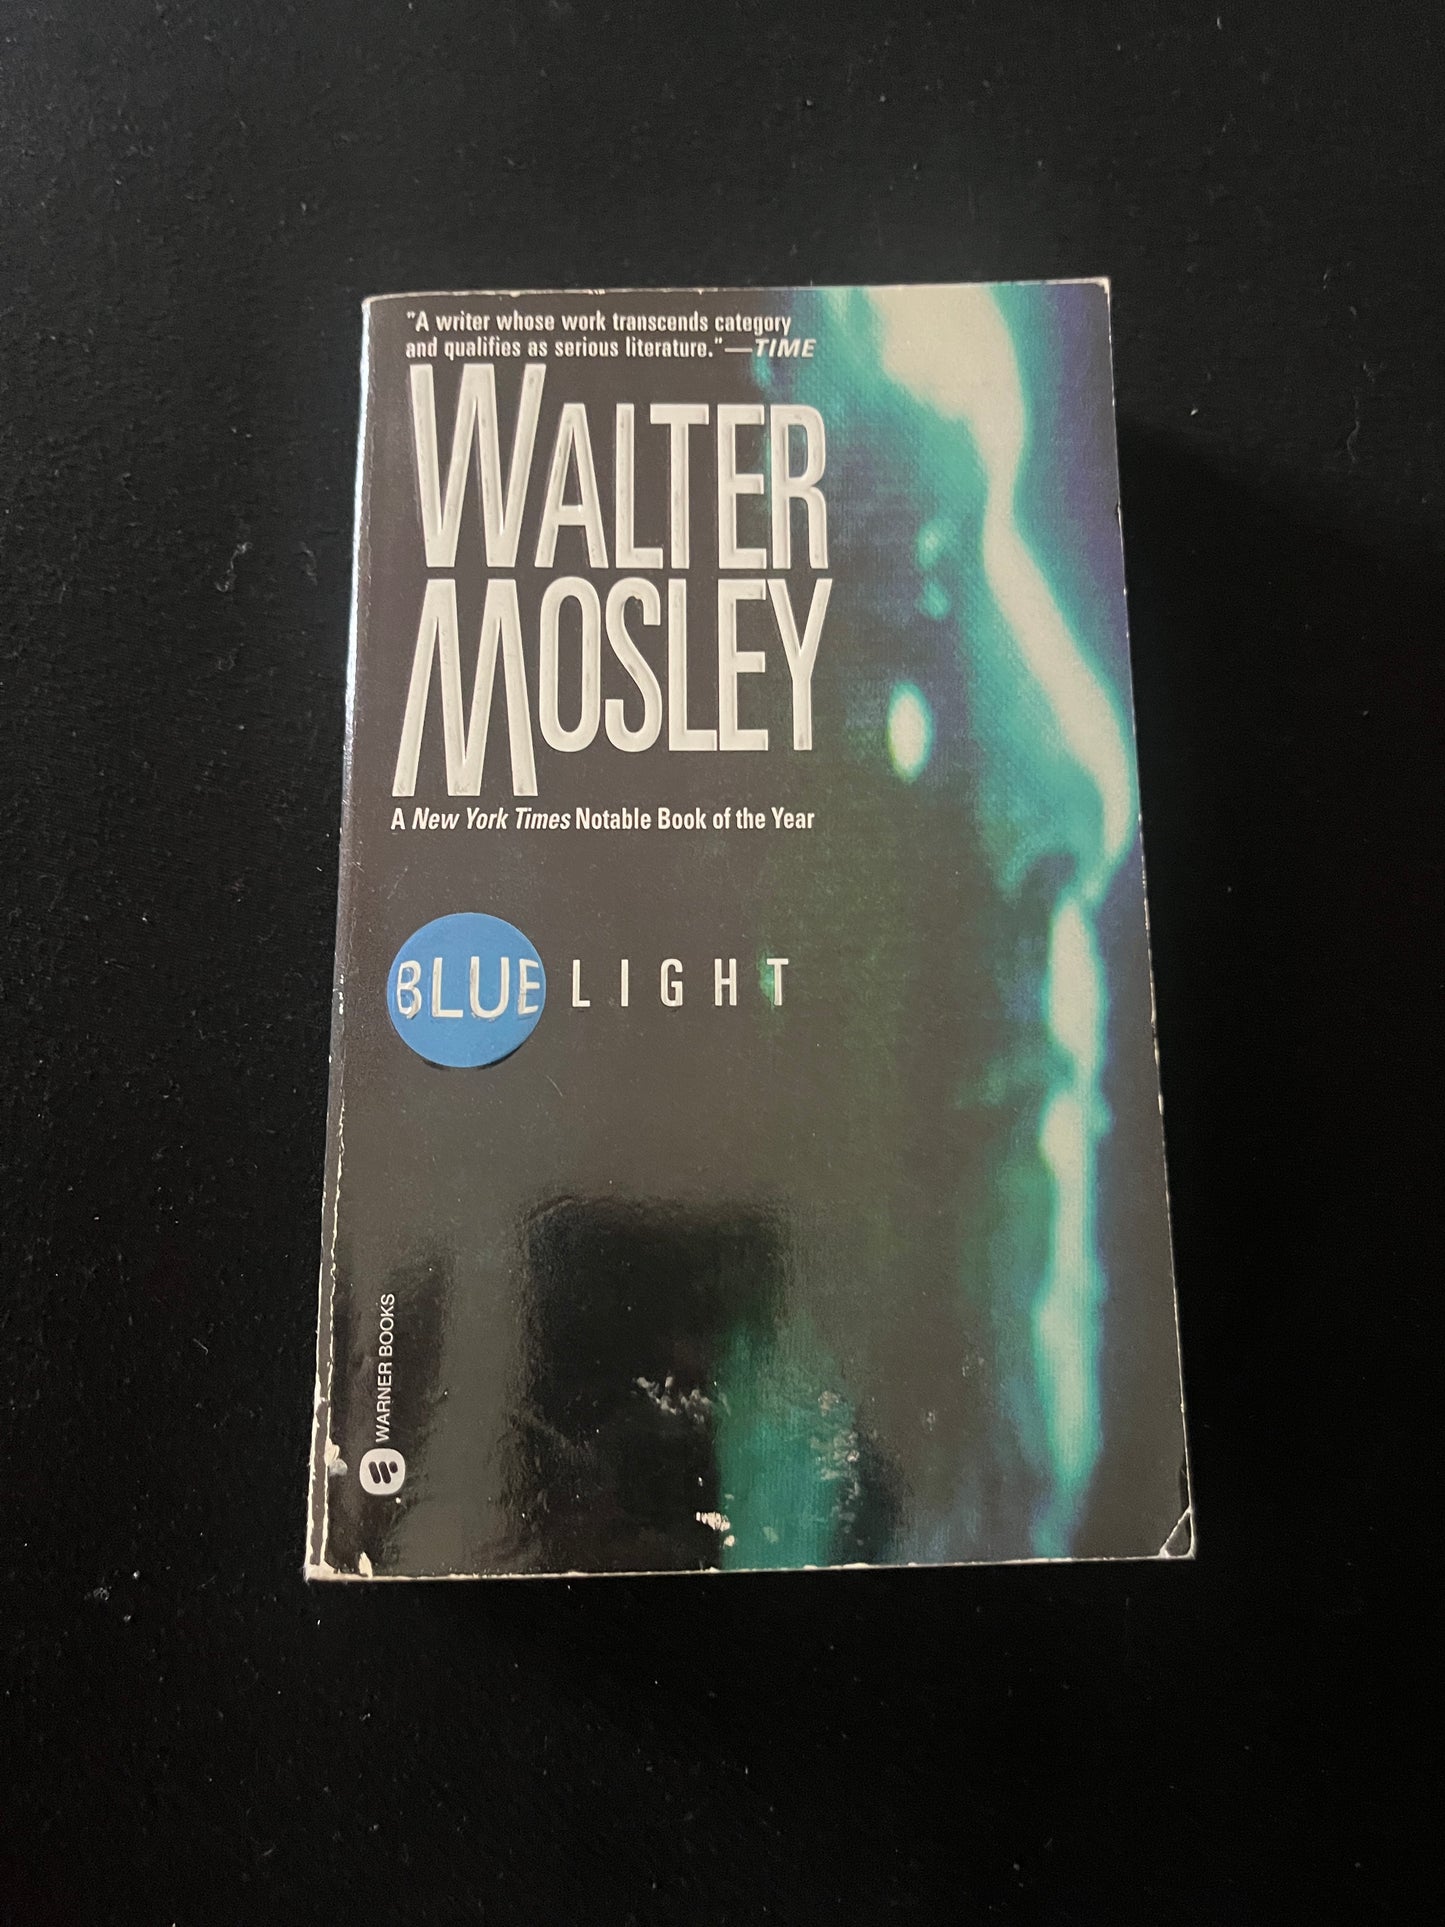 BLUE LIGHT by Walter Mosley